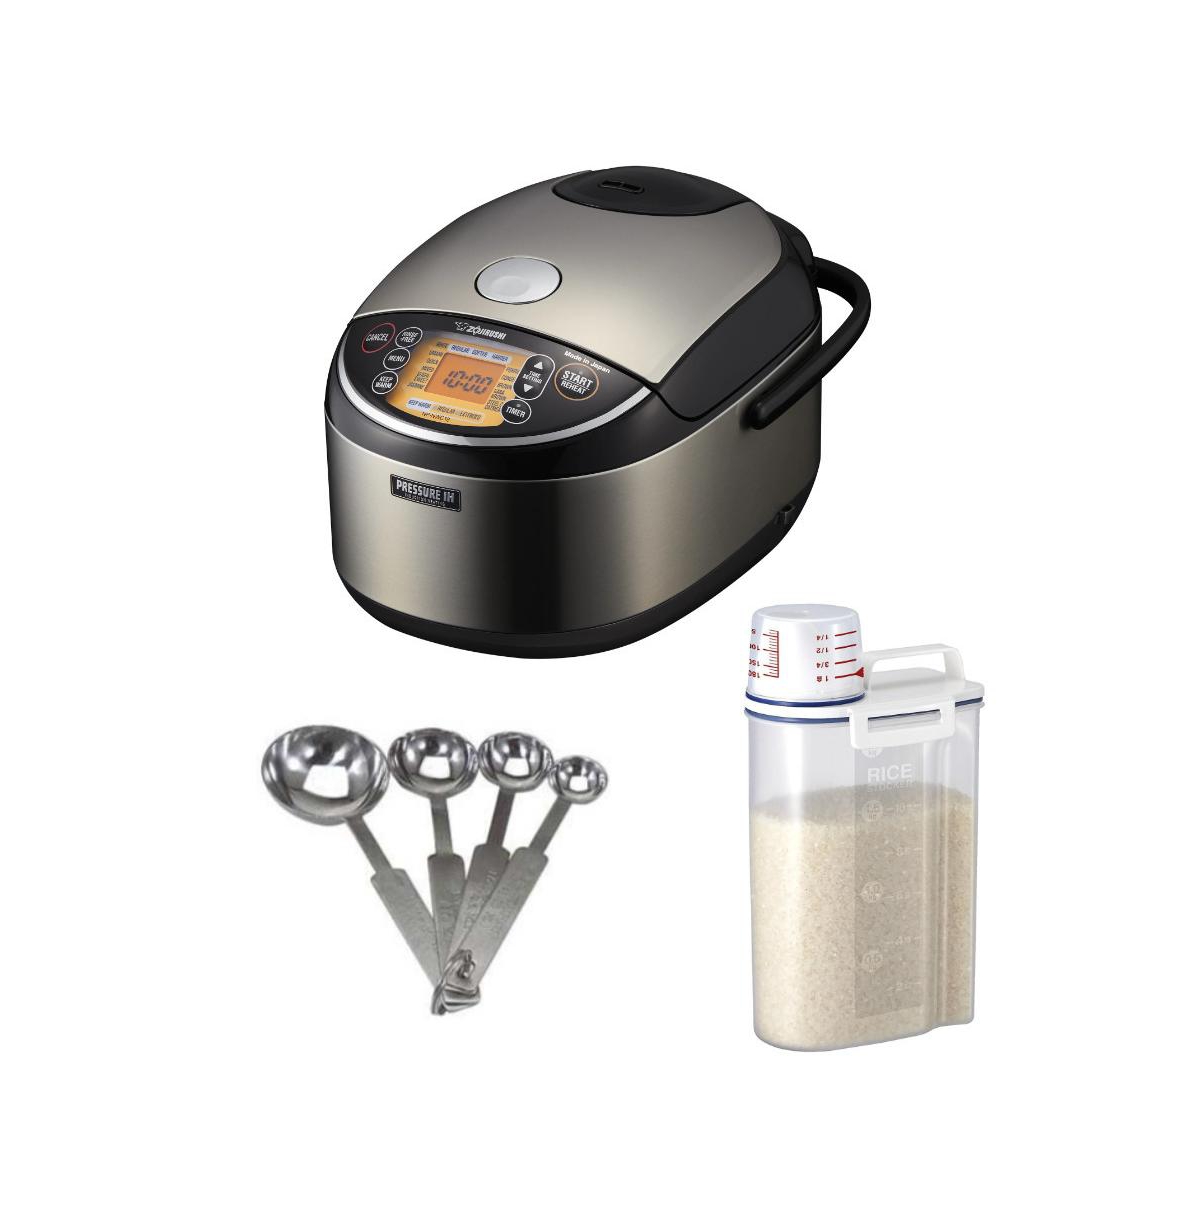 Pressure Induction Heating 10-Cup Rice Cooker/Warmer with Spoon Bundle - Assorted Pre-Pack